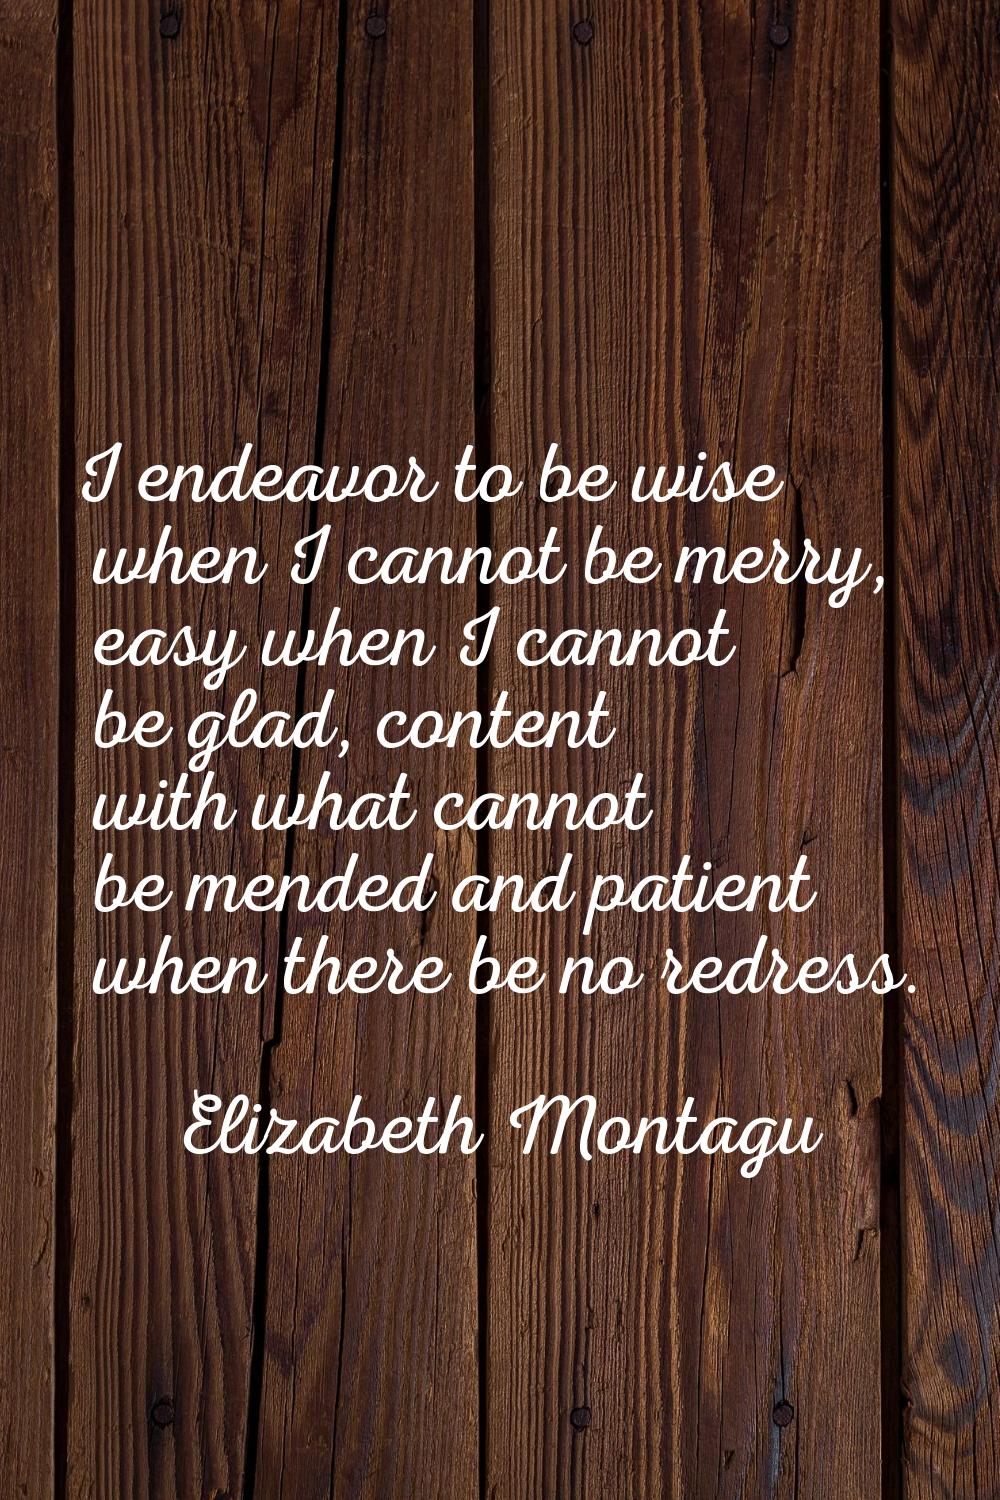 I endeavor to be wise when I cannot be merry, easy when I cannot be glad, content with what cannot 